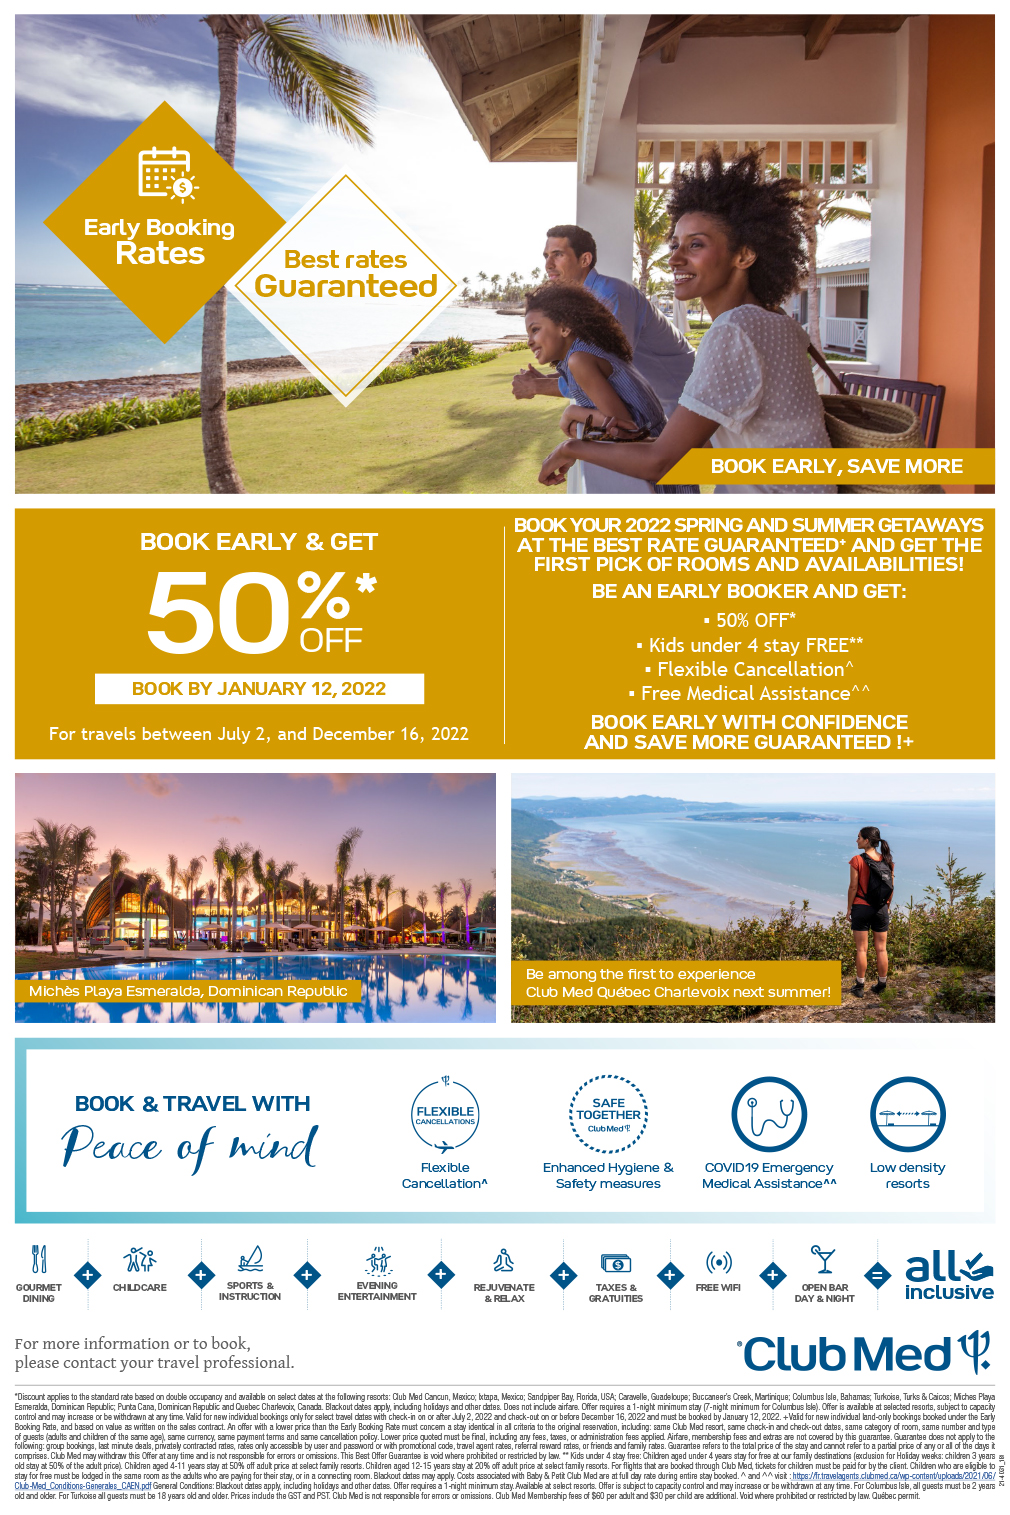 Early Booking Rates at Club Med